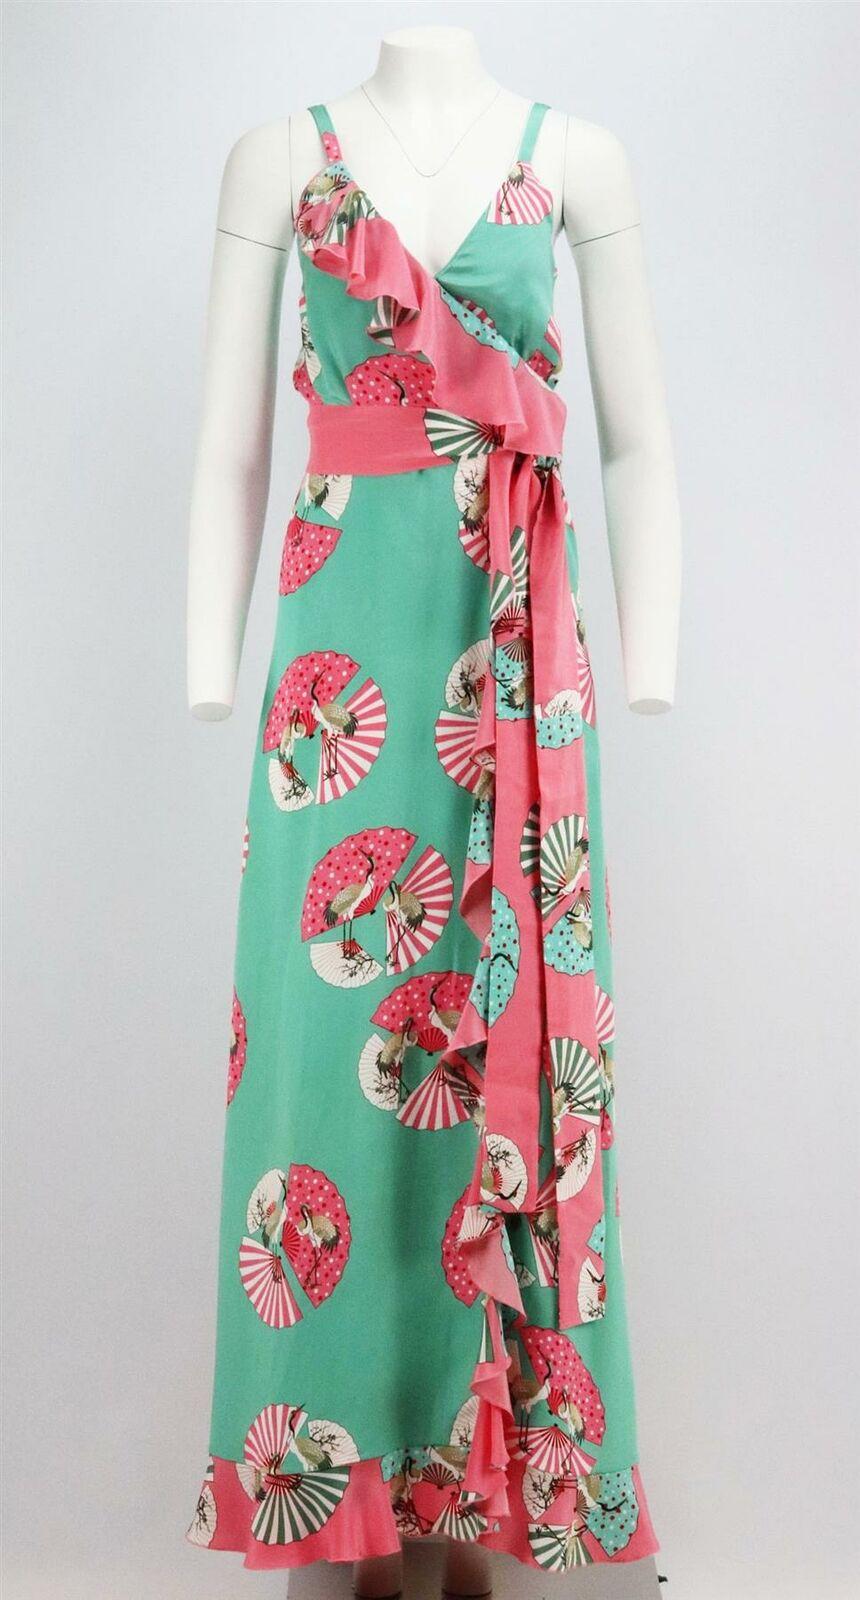 This bohemian maxi dress by Racil is cut from floaty silk crepe de chine decorated with whimsical fans, the flouncy ruffles swish and sway so beautifully in a belted wrap silhouette.
Green, white and pink silk crepe-de-chine.
Belt fastening at